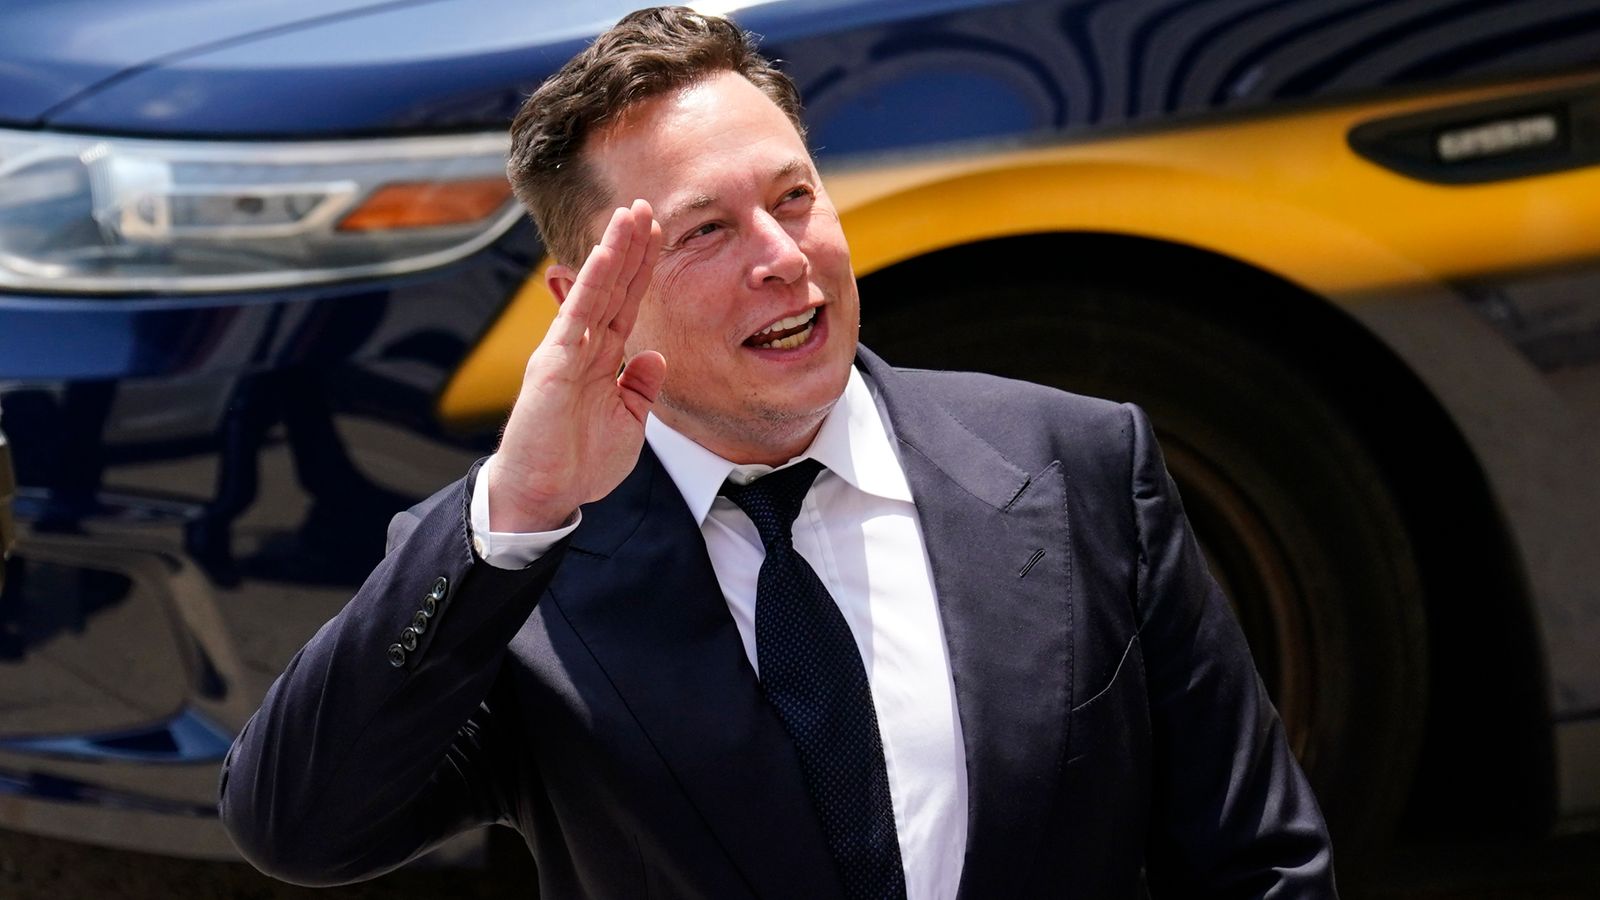 Elon Musk: Tesla CEO named Time magazine's 2021 Person of the Year